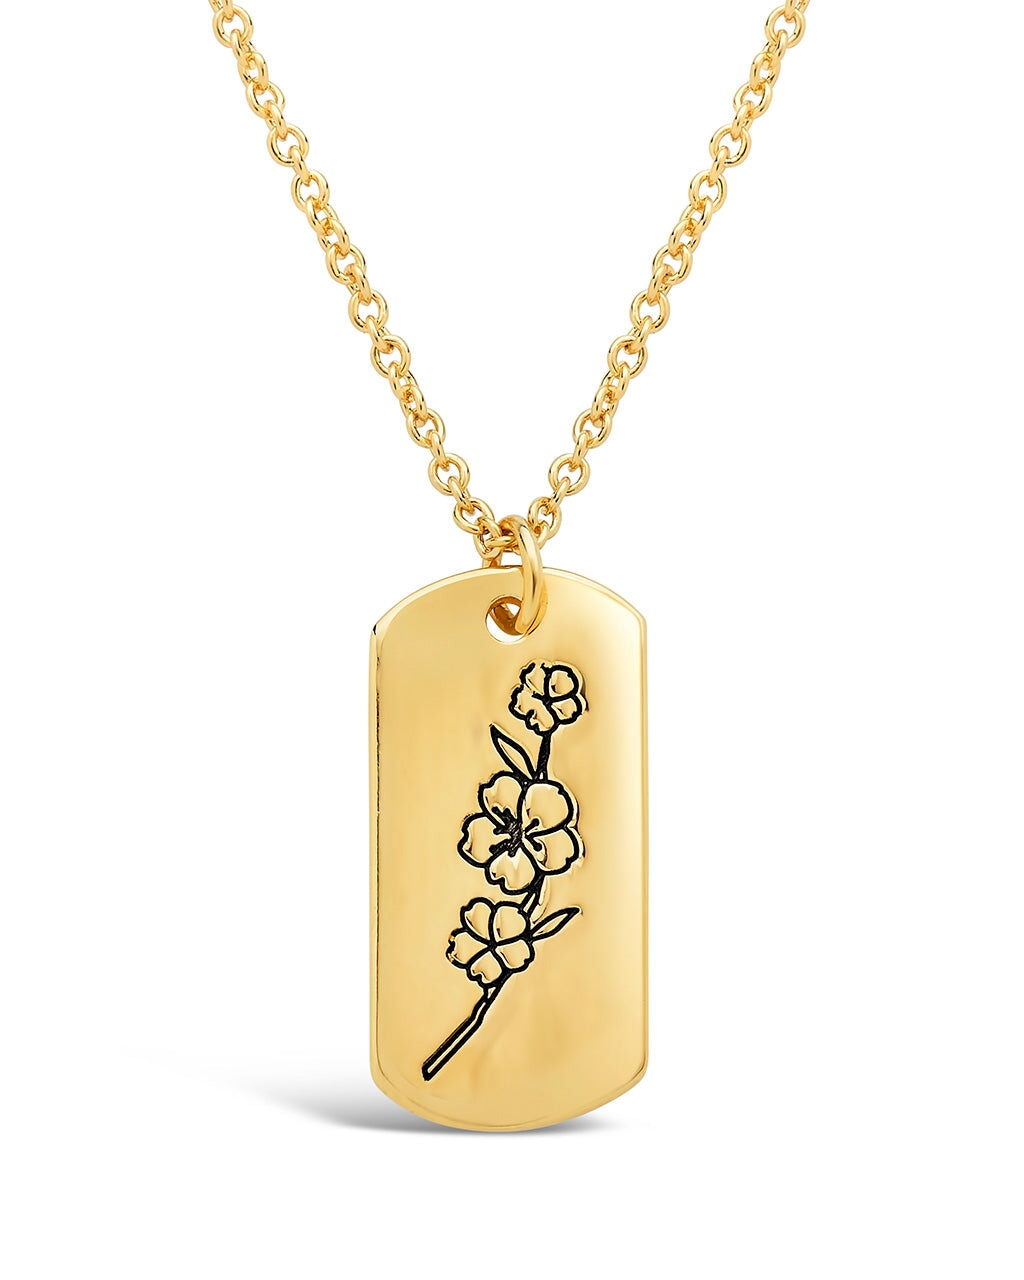 Birth Flower Pendant Necklace Sterling Forever Gold March / Cherry Blossom 